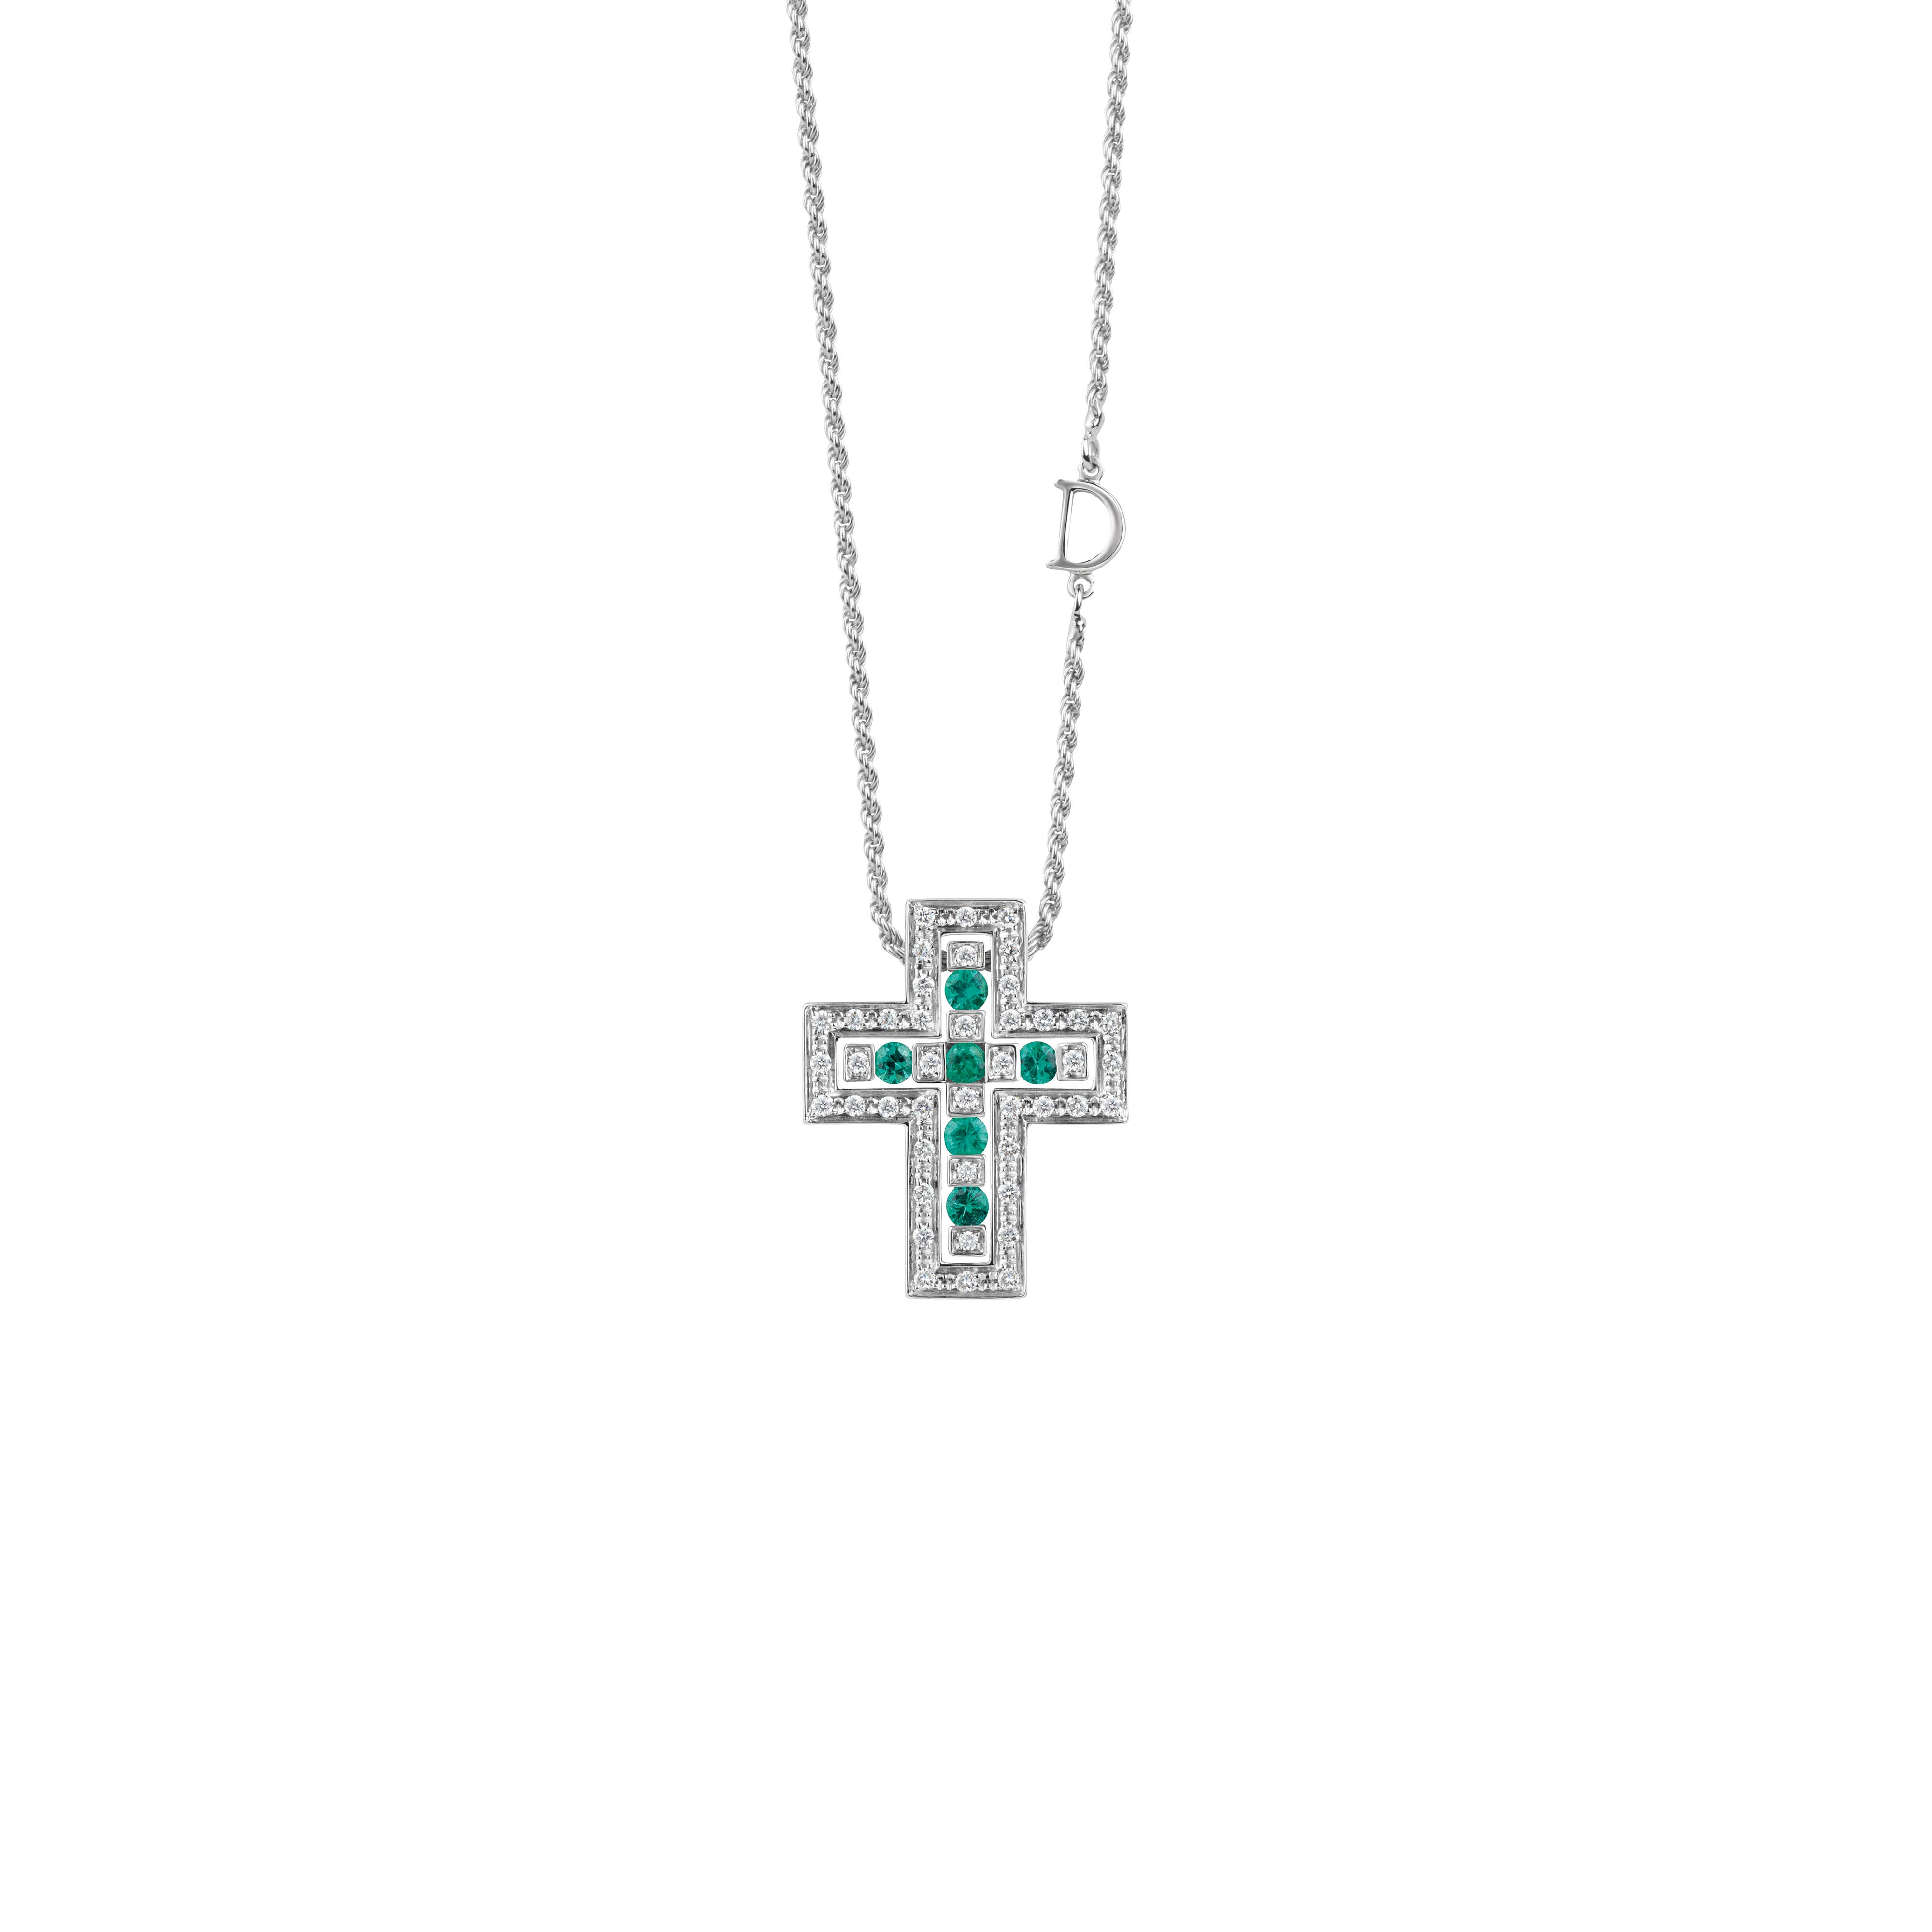 White gold, diamonds and emeralds necklace